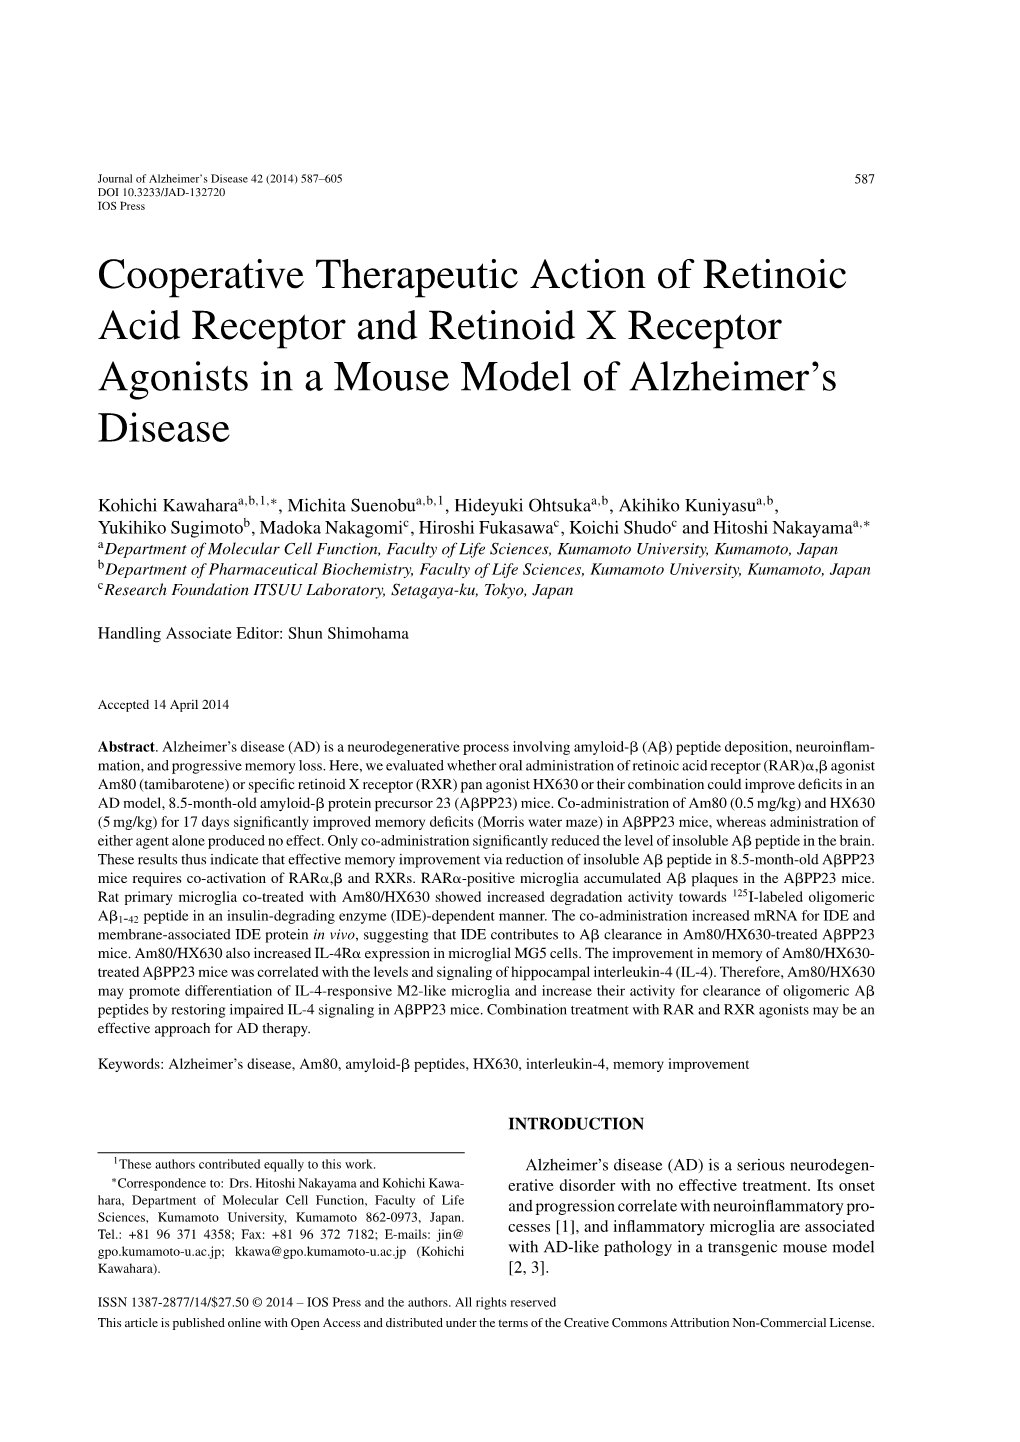 Cooperative Therapeutic Action of Retinoic Acid Receptor and Retinoid X Receptor Agonists in a Mouse Model of Alzheimer’S Disease